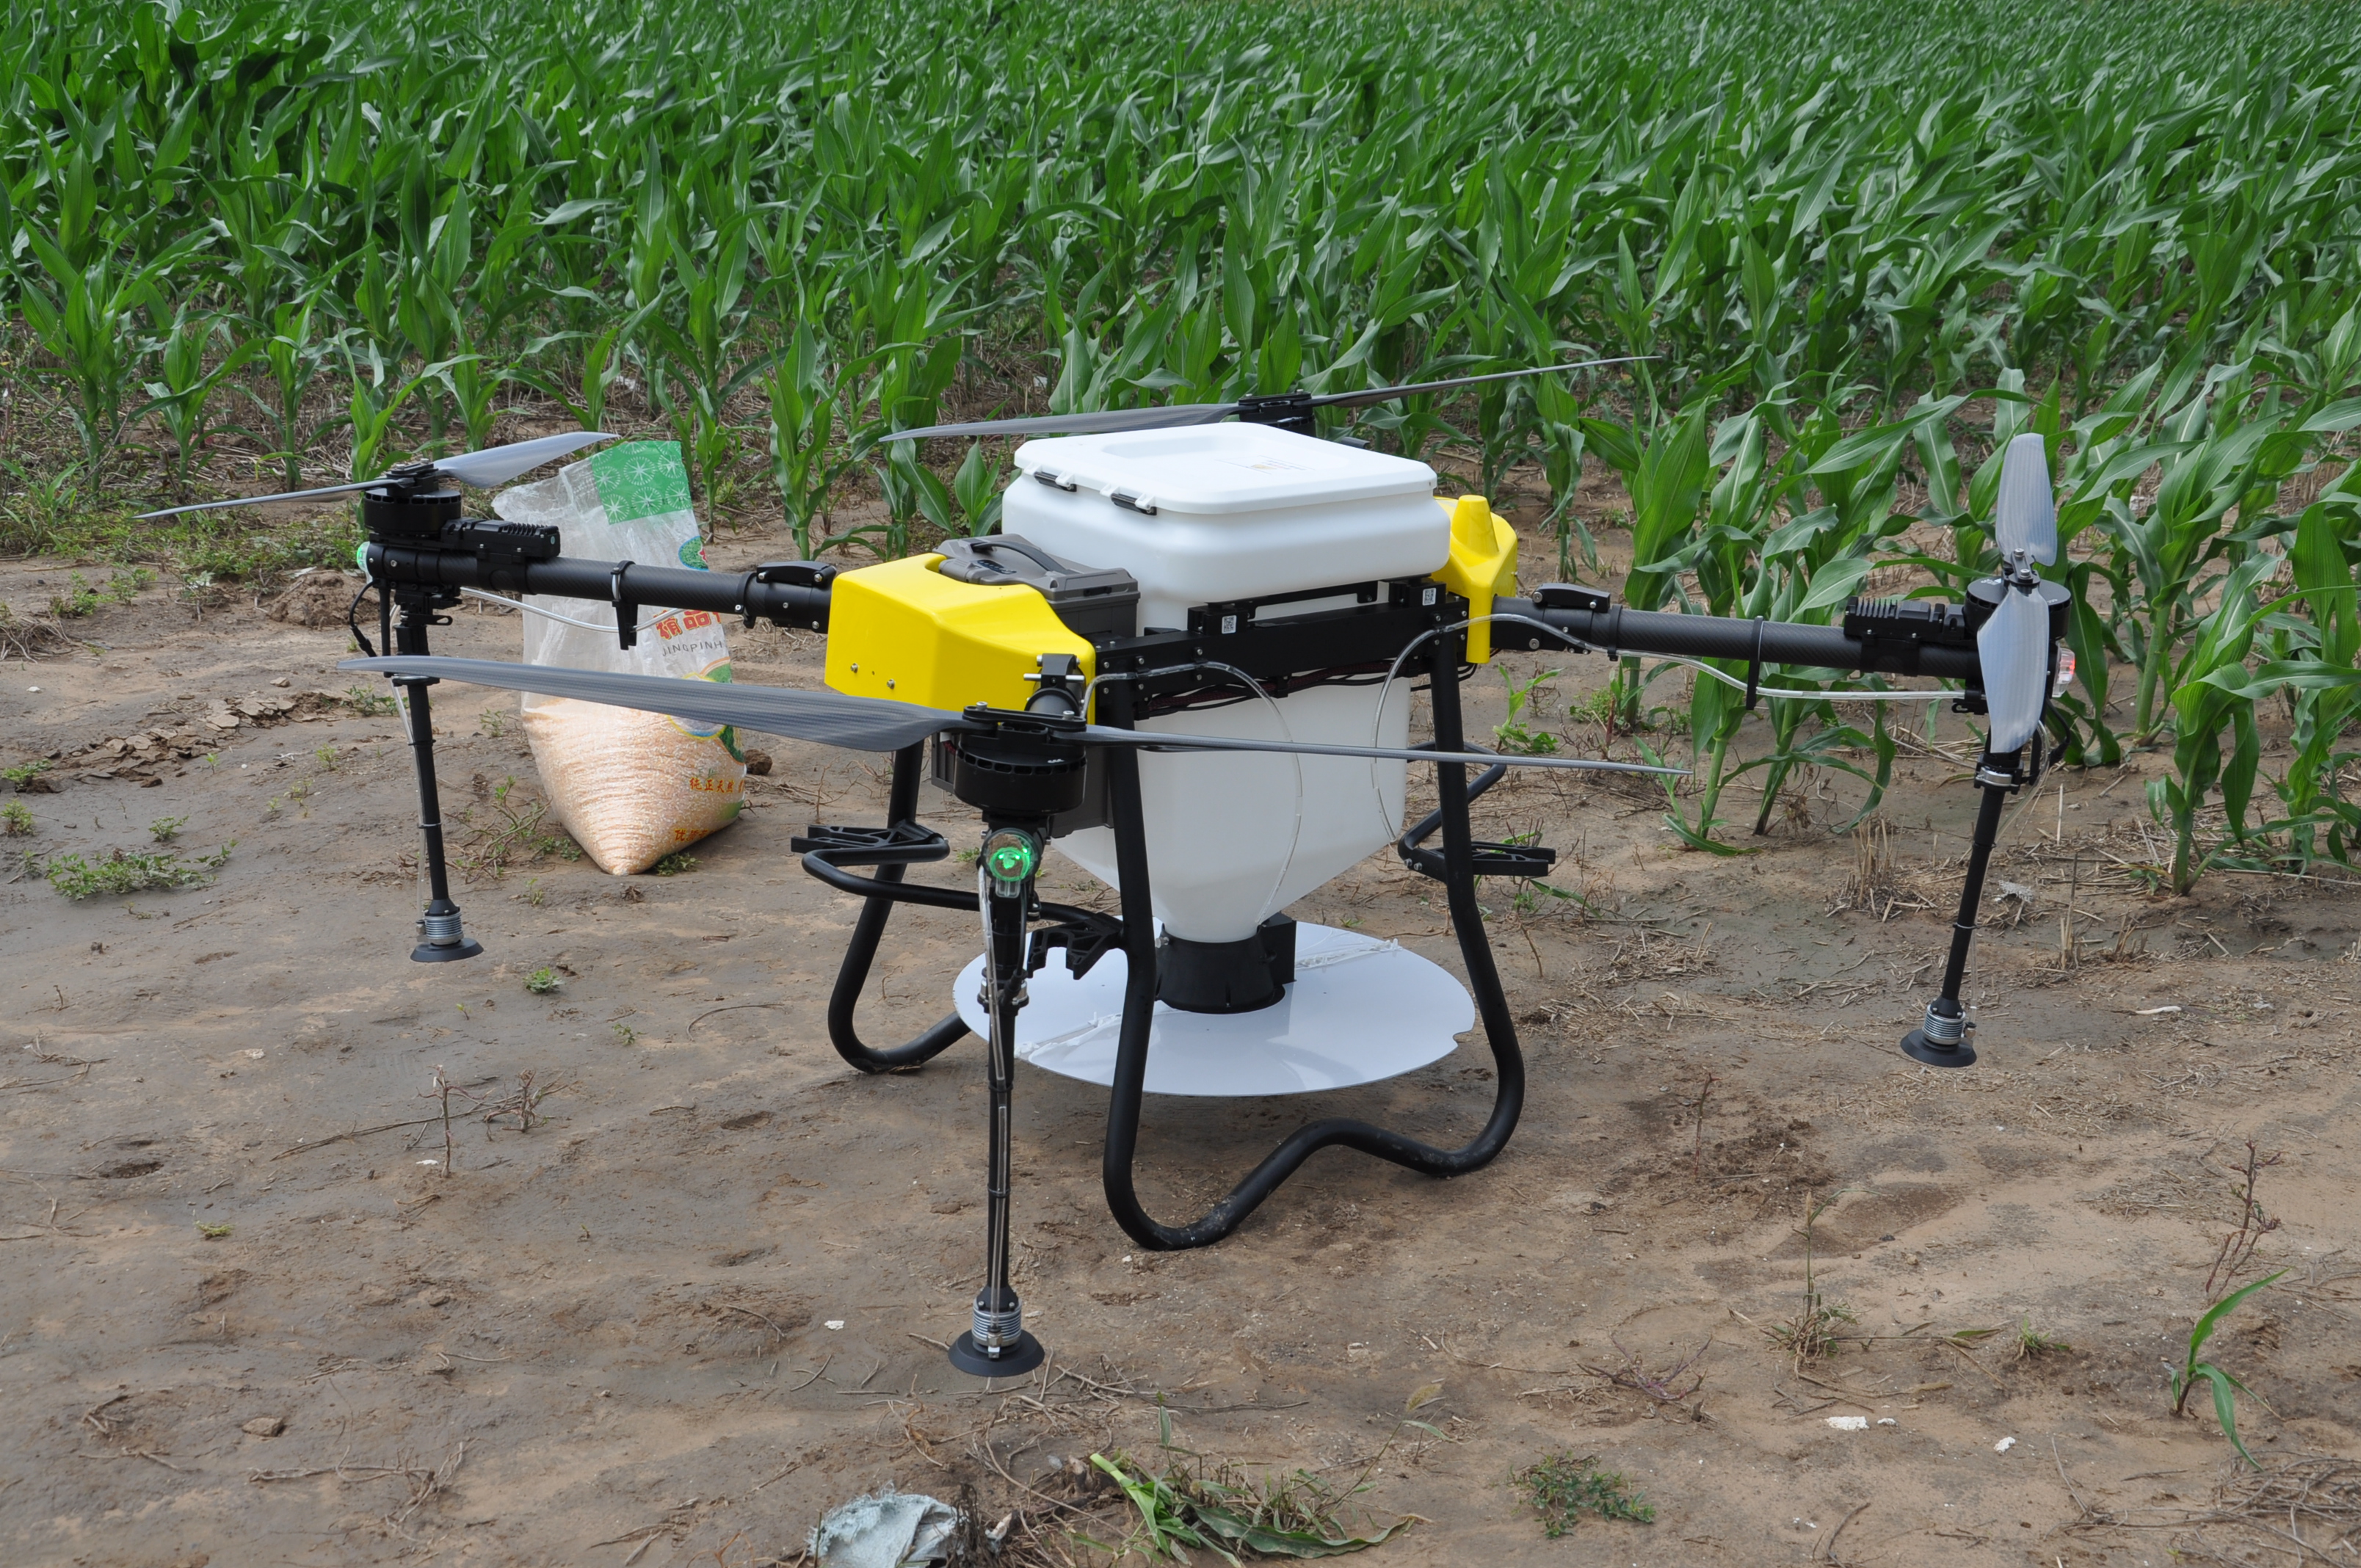 Joyance 40L payload agricultural drone fumigation spraying Farm Drones for Agriculture Machine Drone Crops Fumigadoras Uav